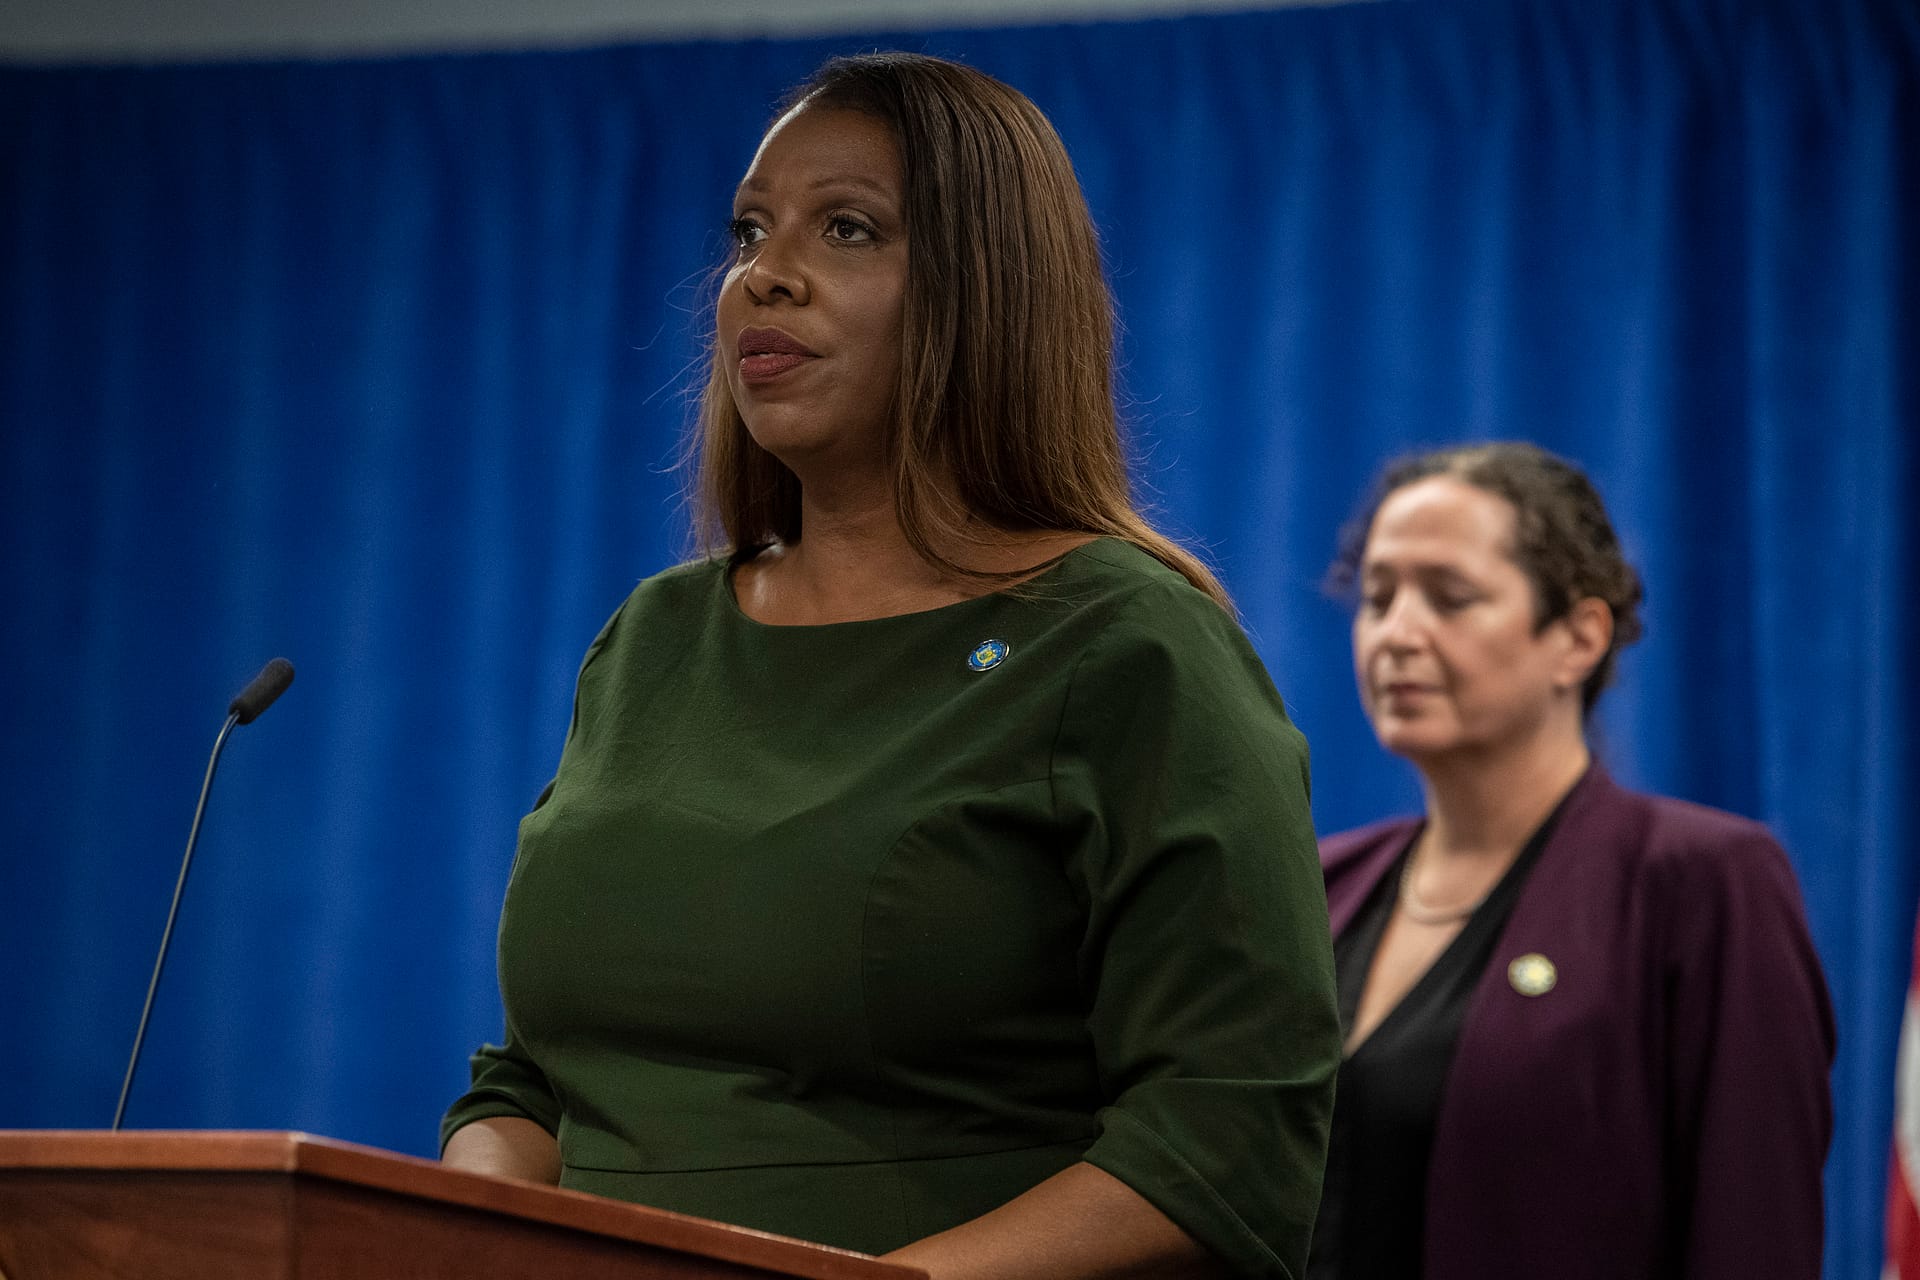 Tish James fundraising appeal vows she will ‘never be bullied’ as attacks from Trump, Cuomo mount